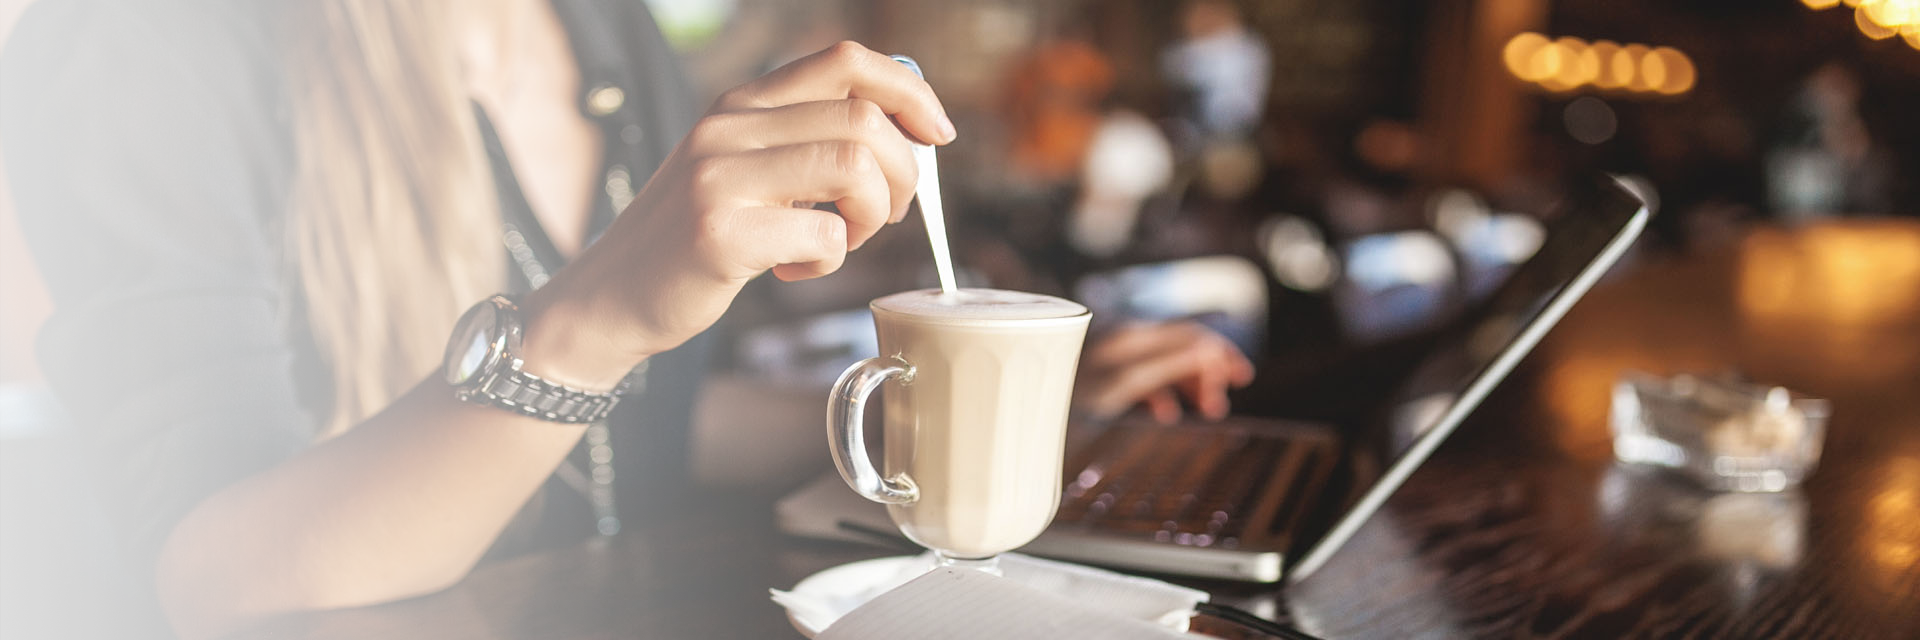 Image showing a close up of a woman in a coffee shop using her laptop whilst stirring her coffee